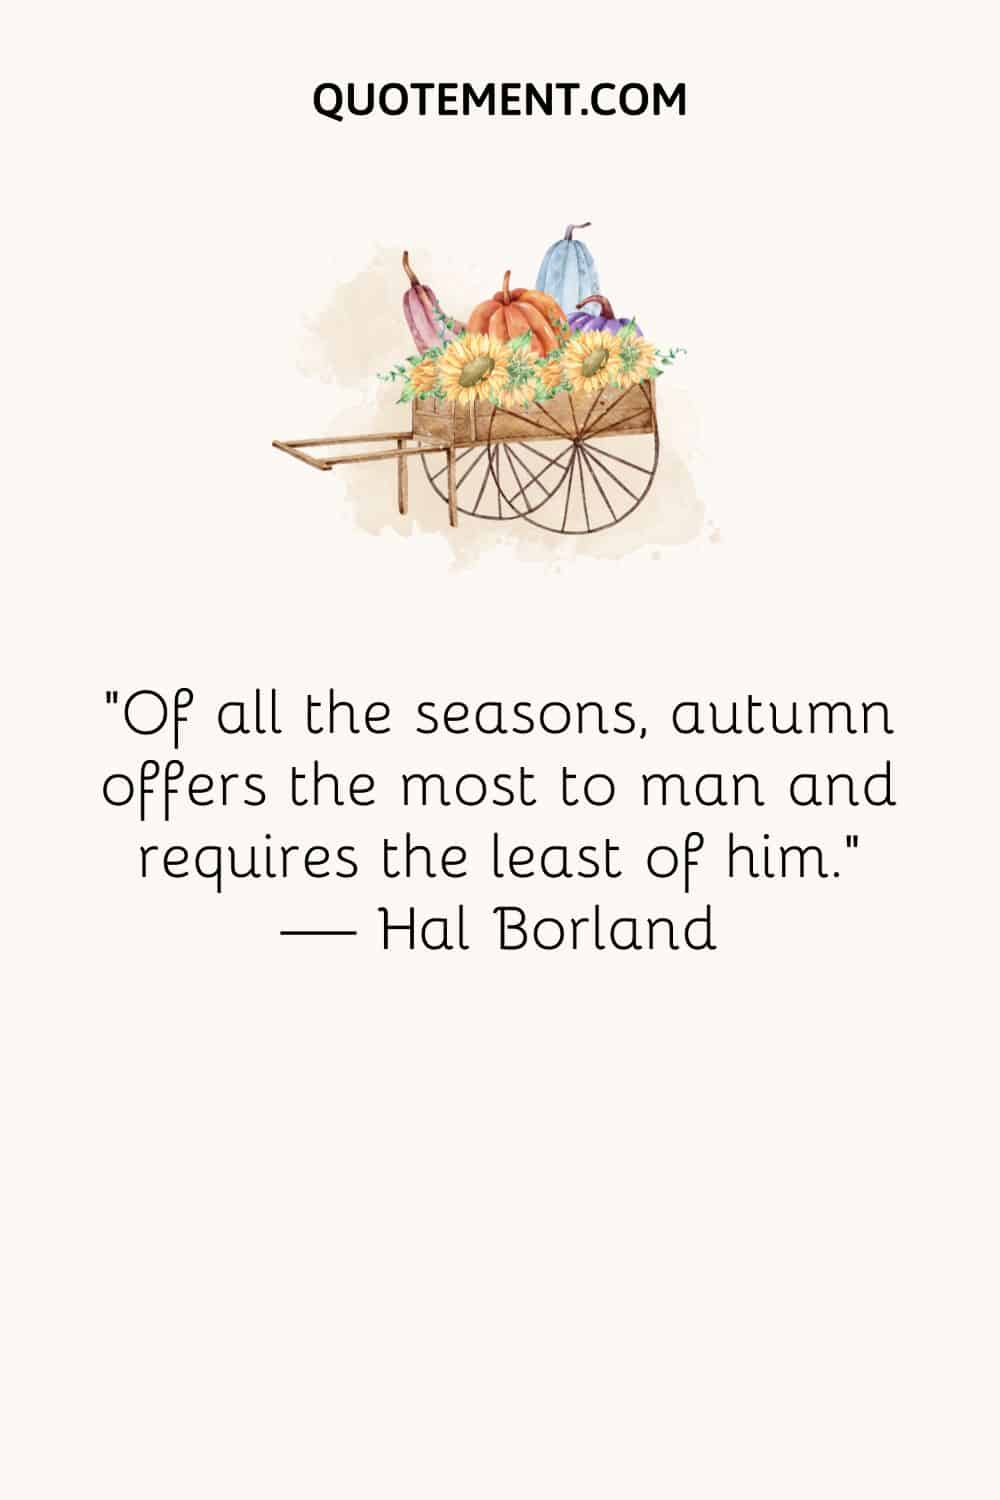 vintage cart wheel image representing inspirational quote for October